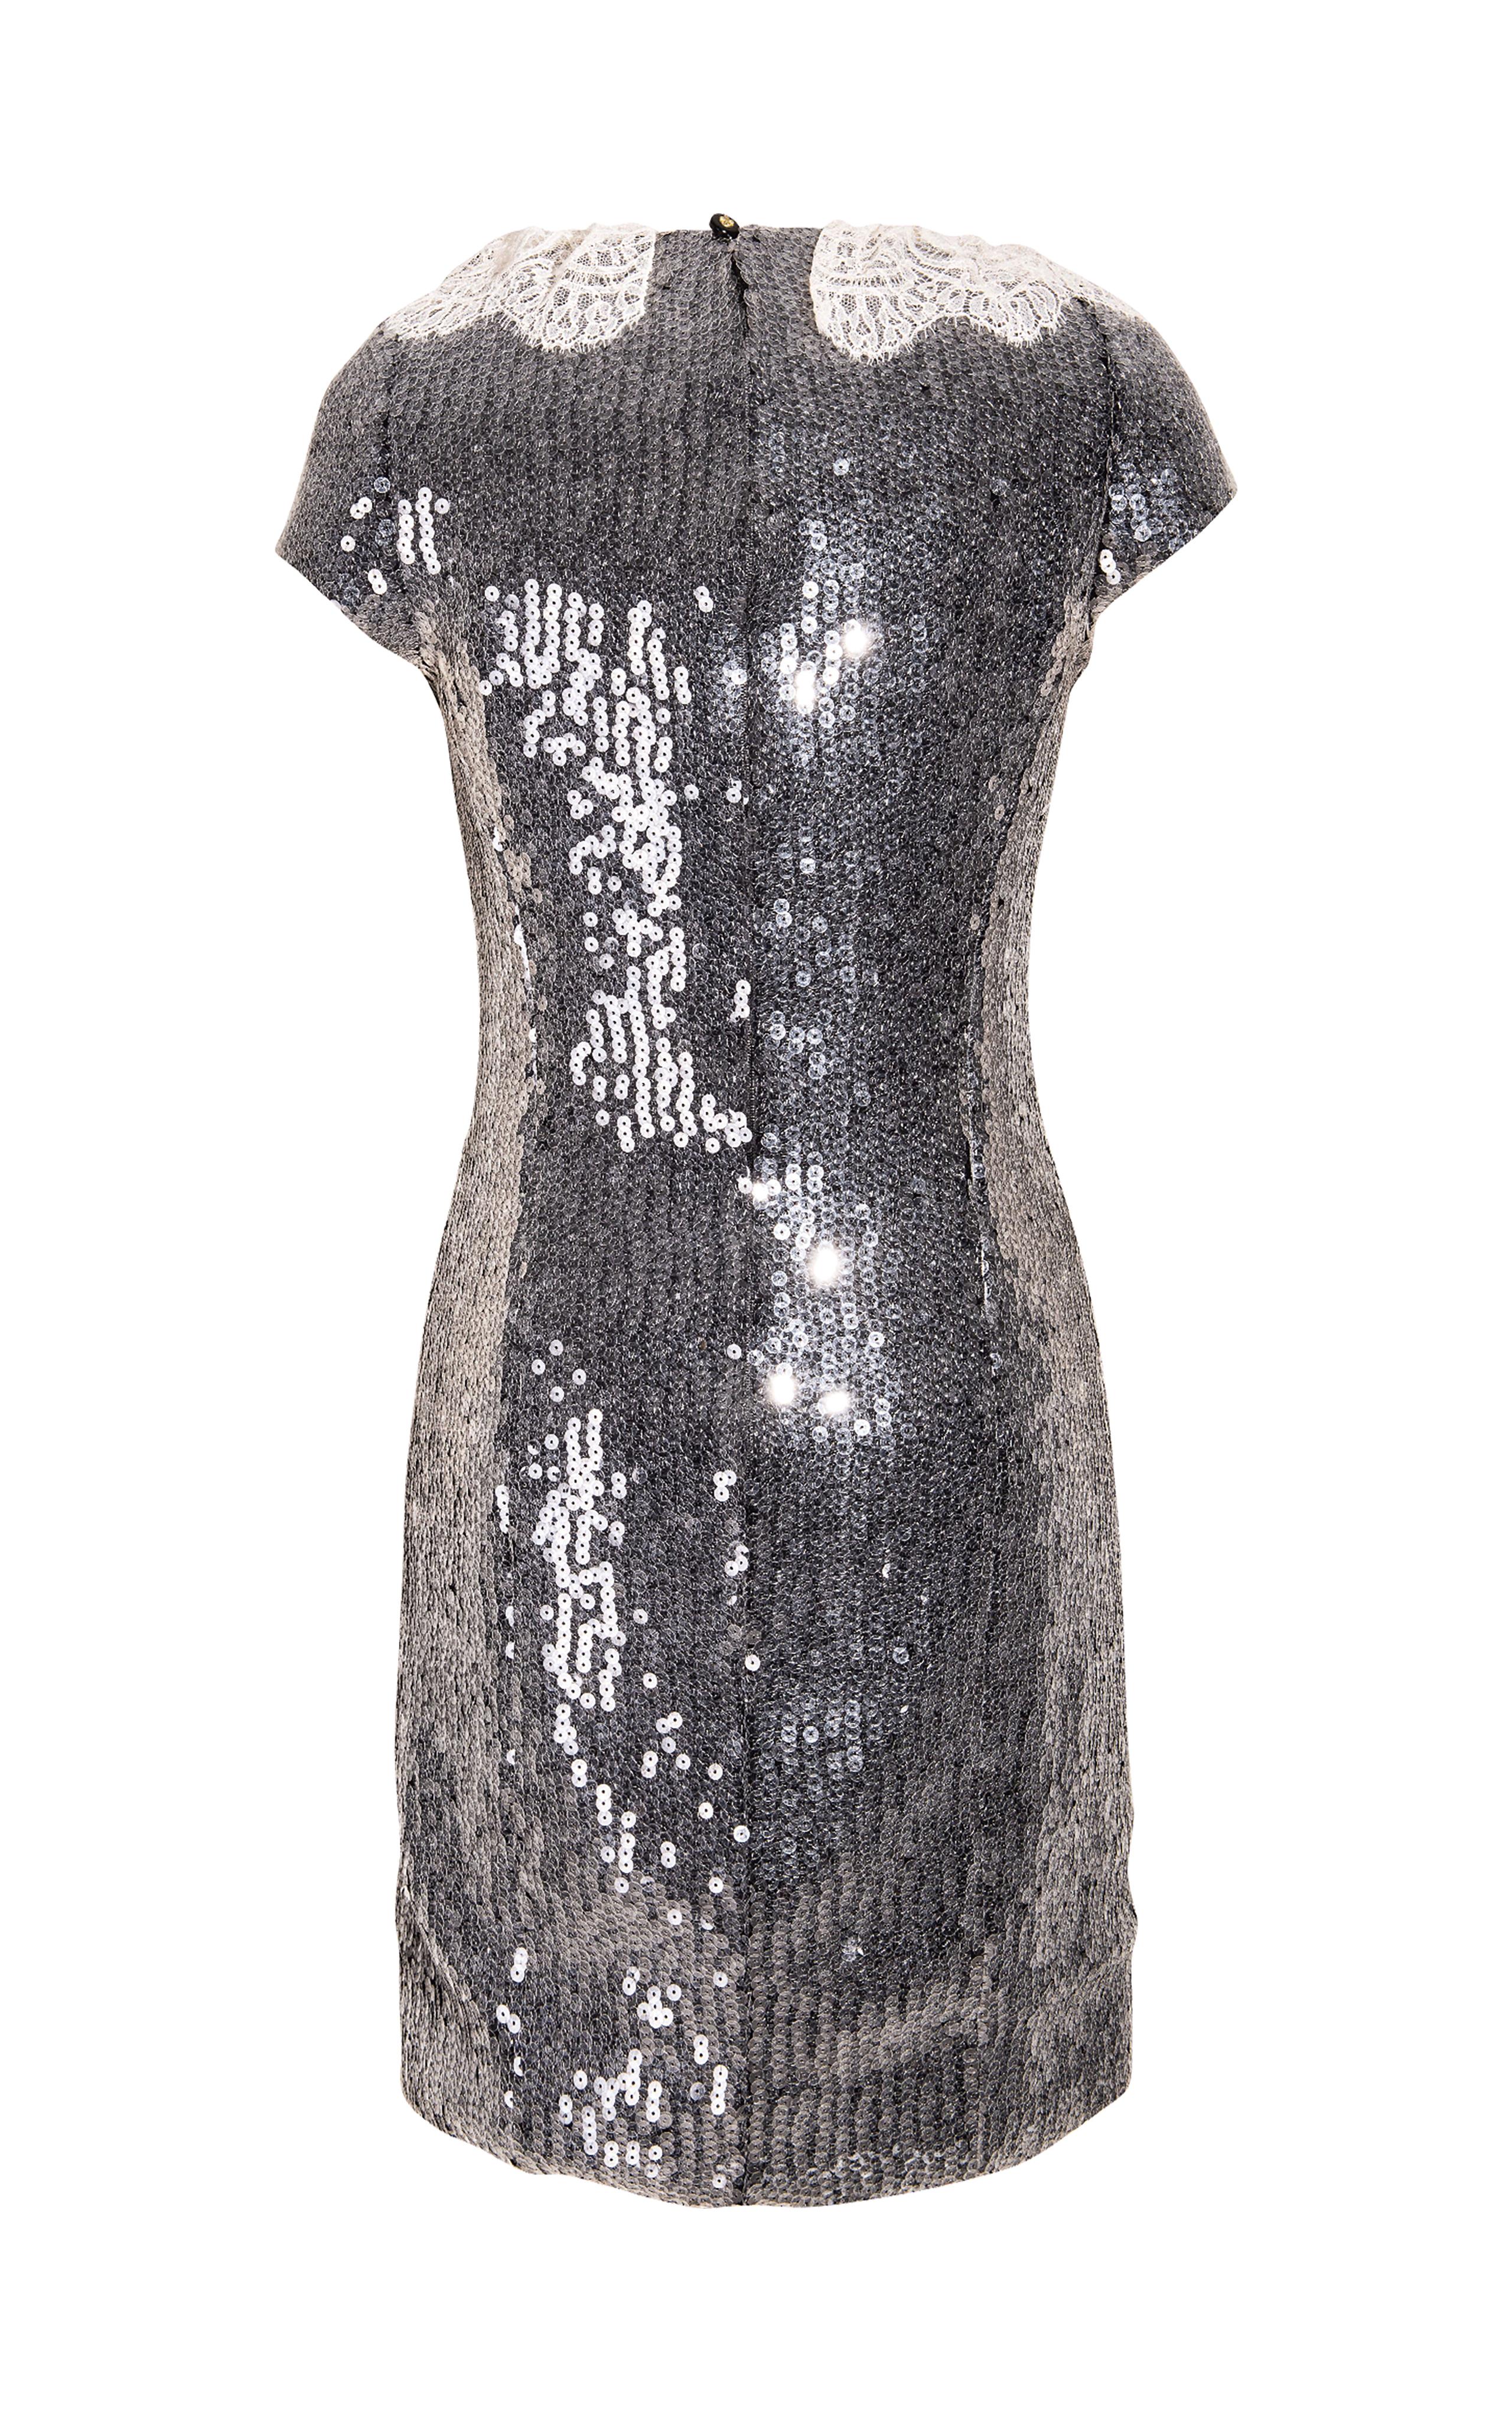 Women's A/W 1994 Chanel Sequin Dress with Iridescent Camellia Brooch